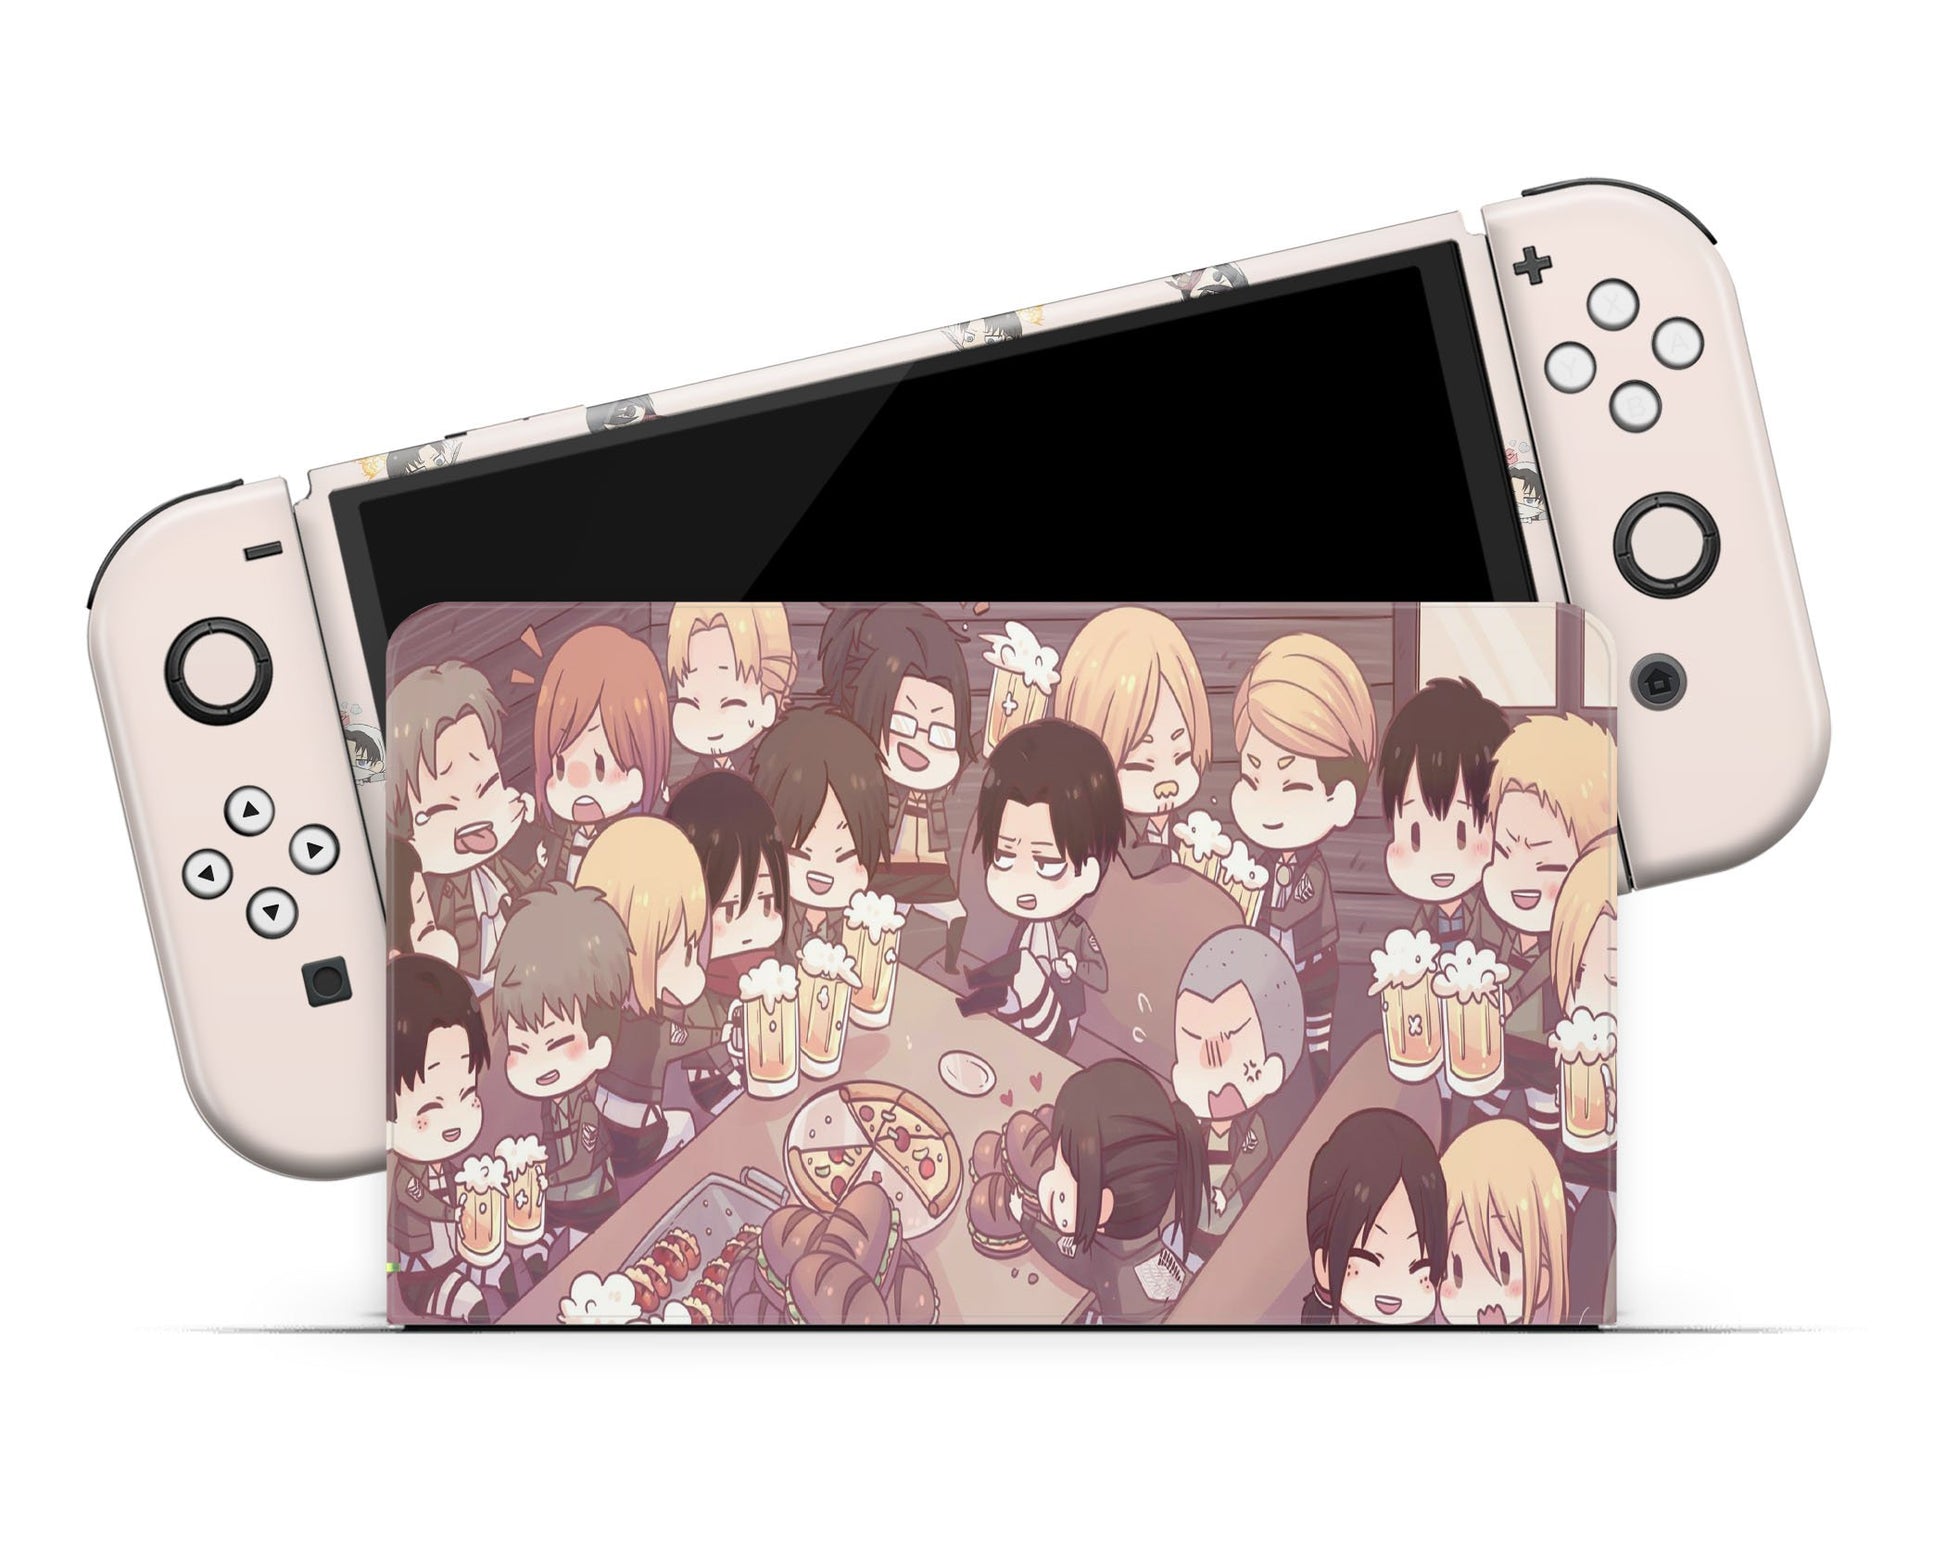 Anime Town Creations Nintendo Switch OLED Cute Attack On Titan Chibi Vinyl only Skins - Anime Attack on Titan Switch OLED Skin